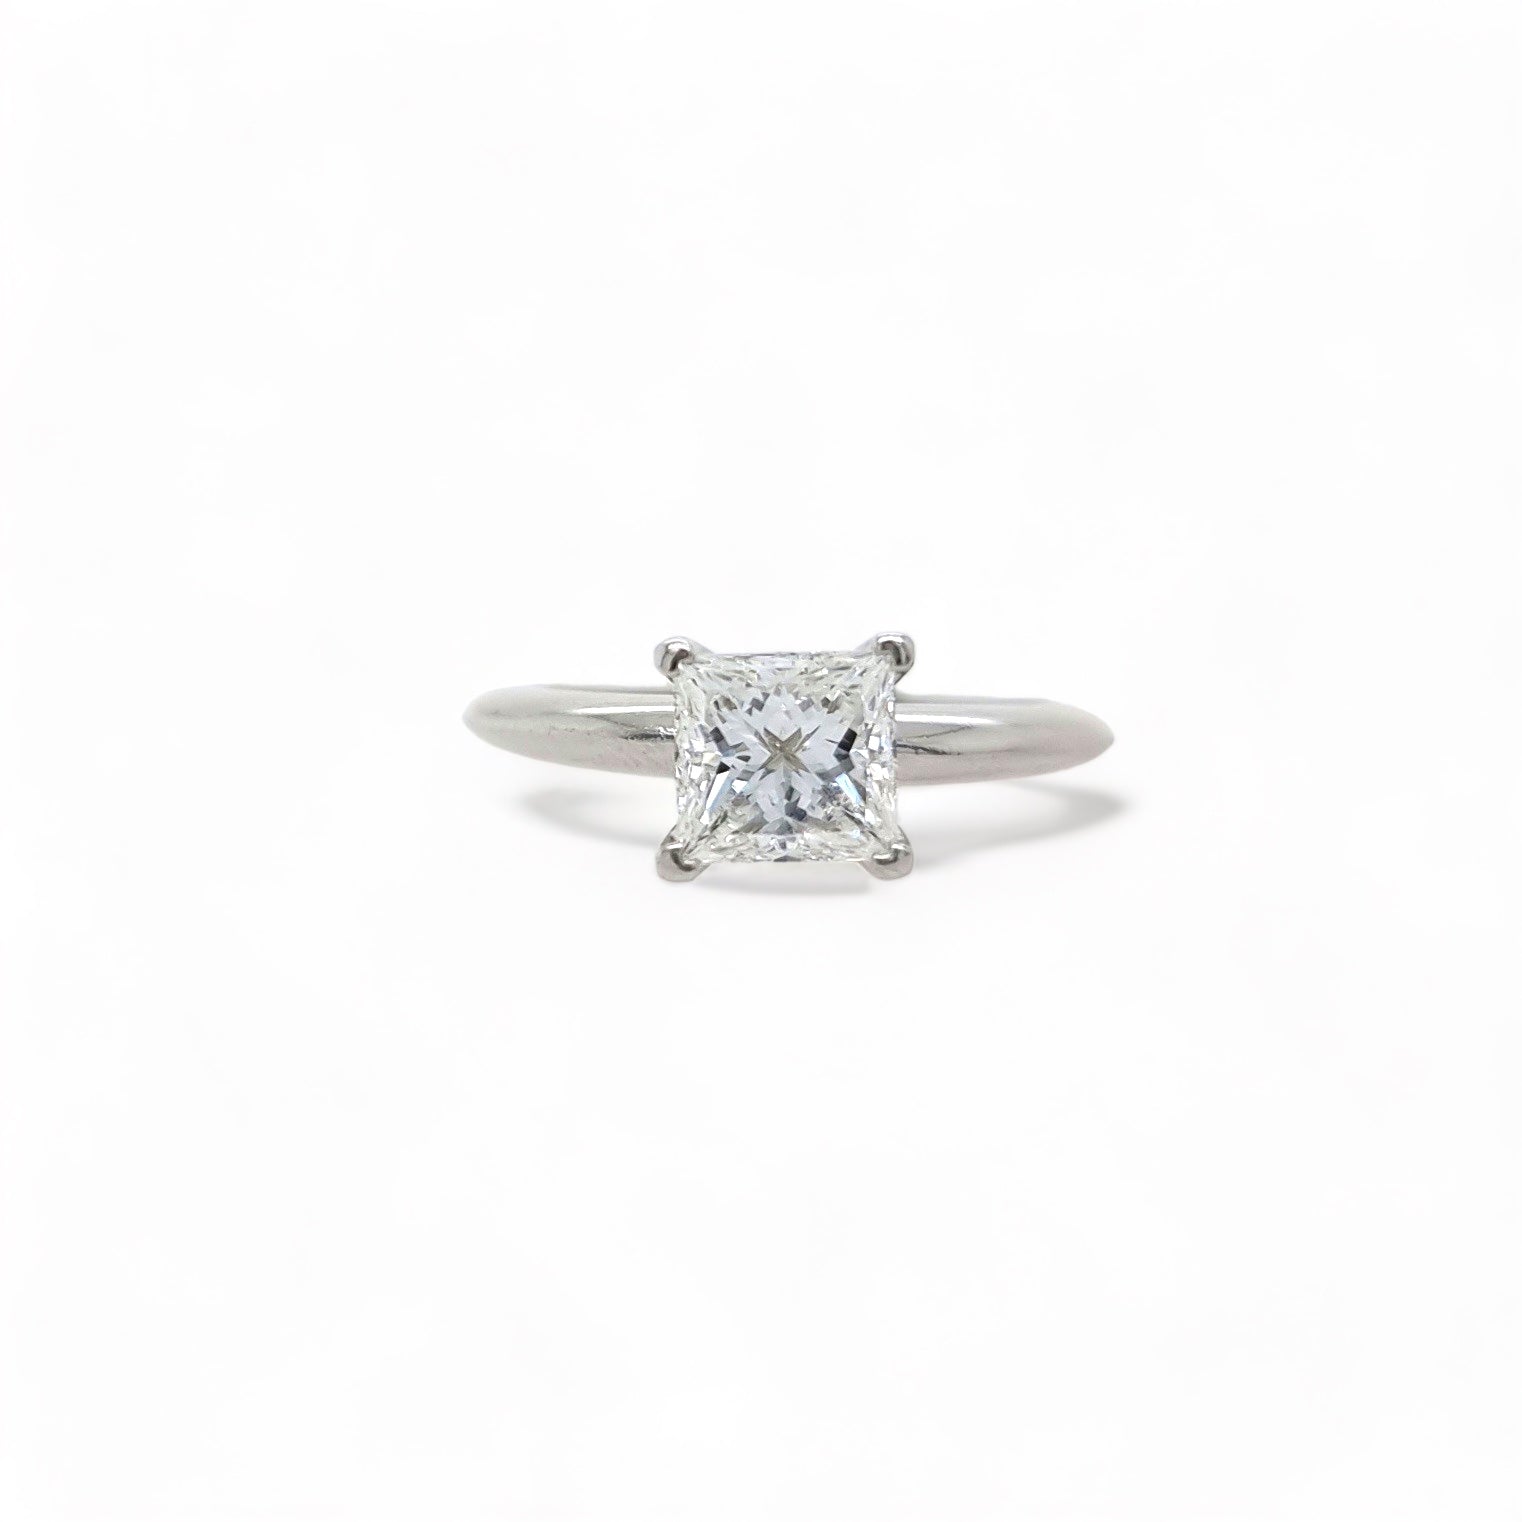 Search results for: 'princess cut 14k white grown engagement ring tiffany  size'